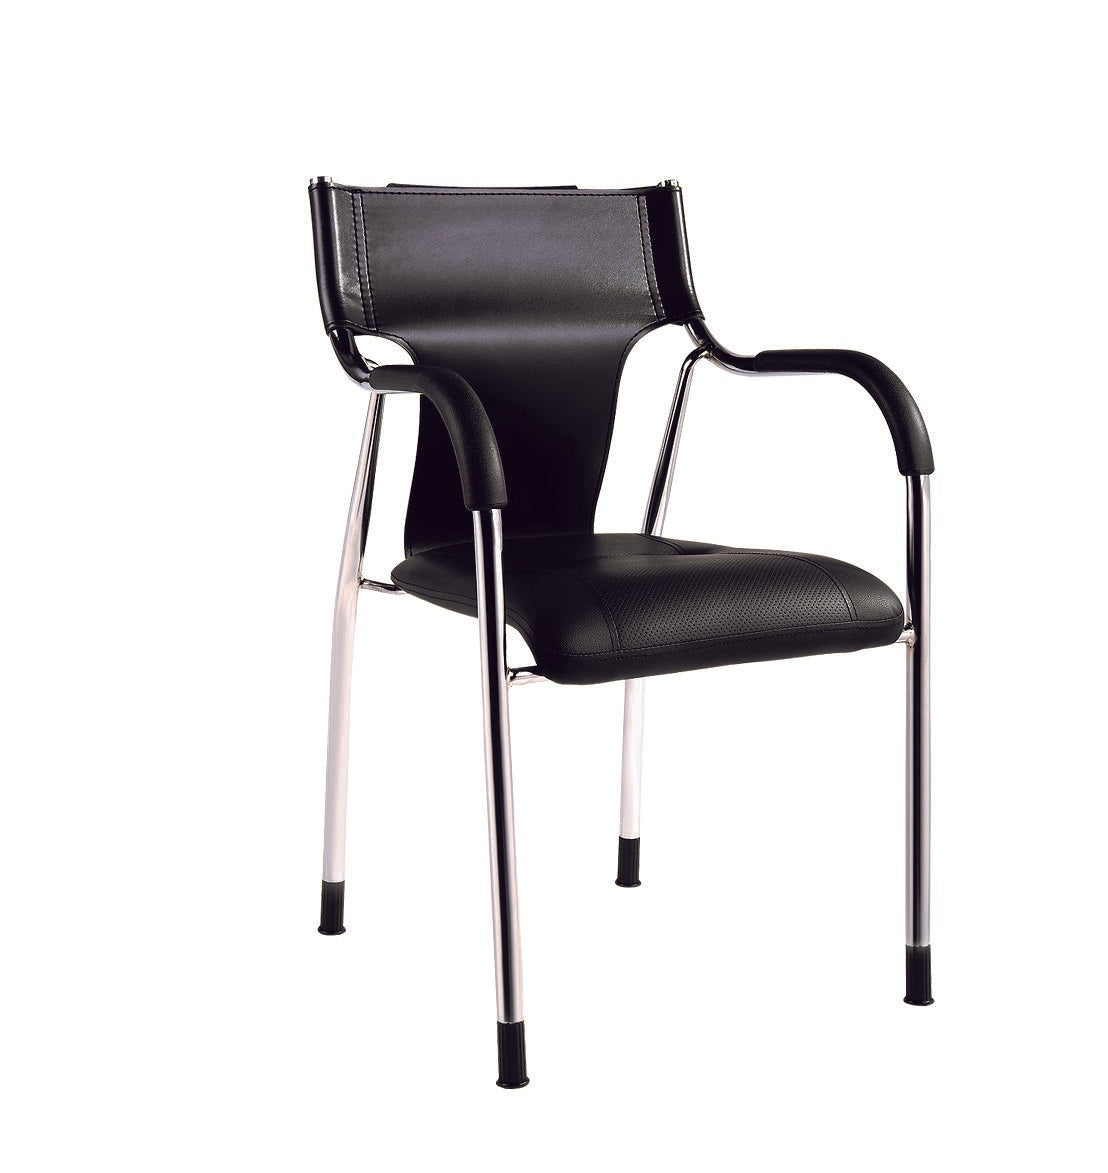 Visitor Chair - Model KP-C-09 | Buy Visitor Chairs Online